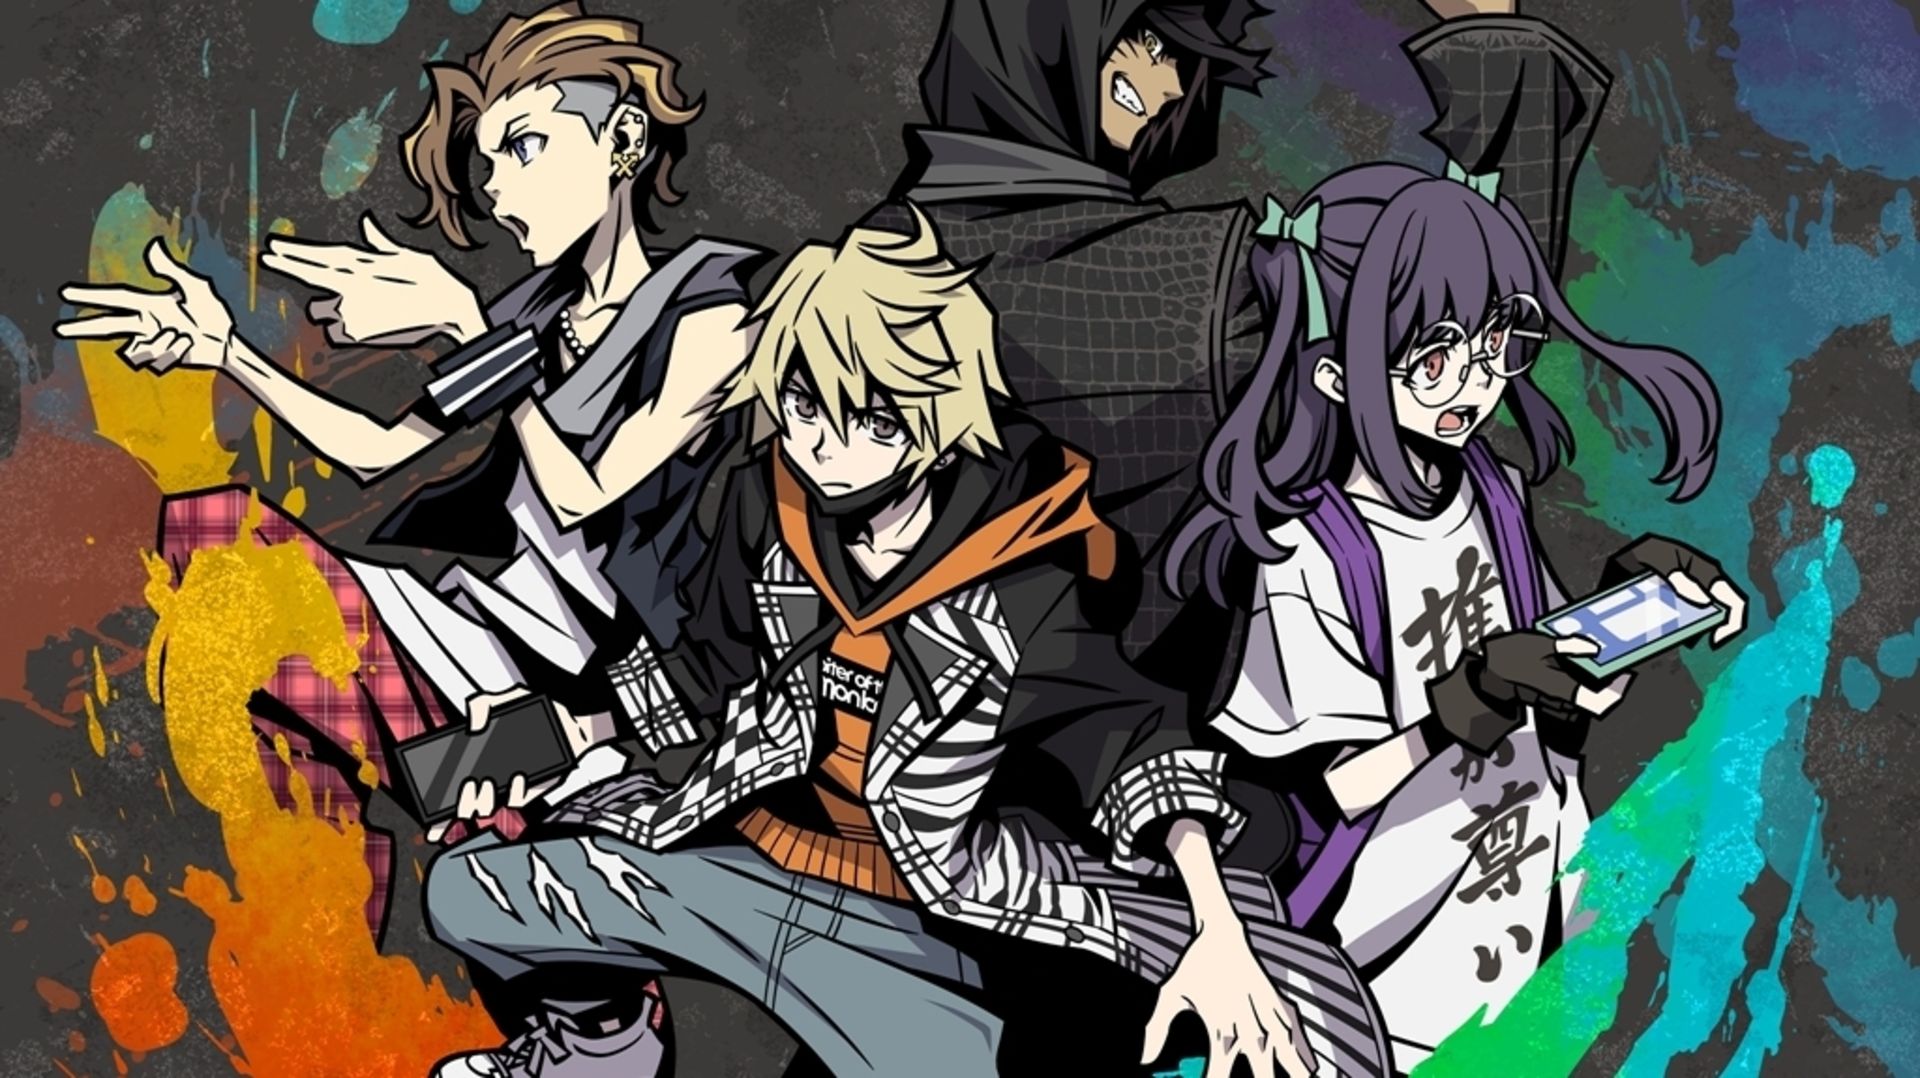 Game: Neo The World Ends with You The World Ends With You Review